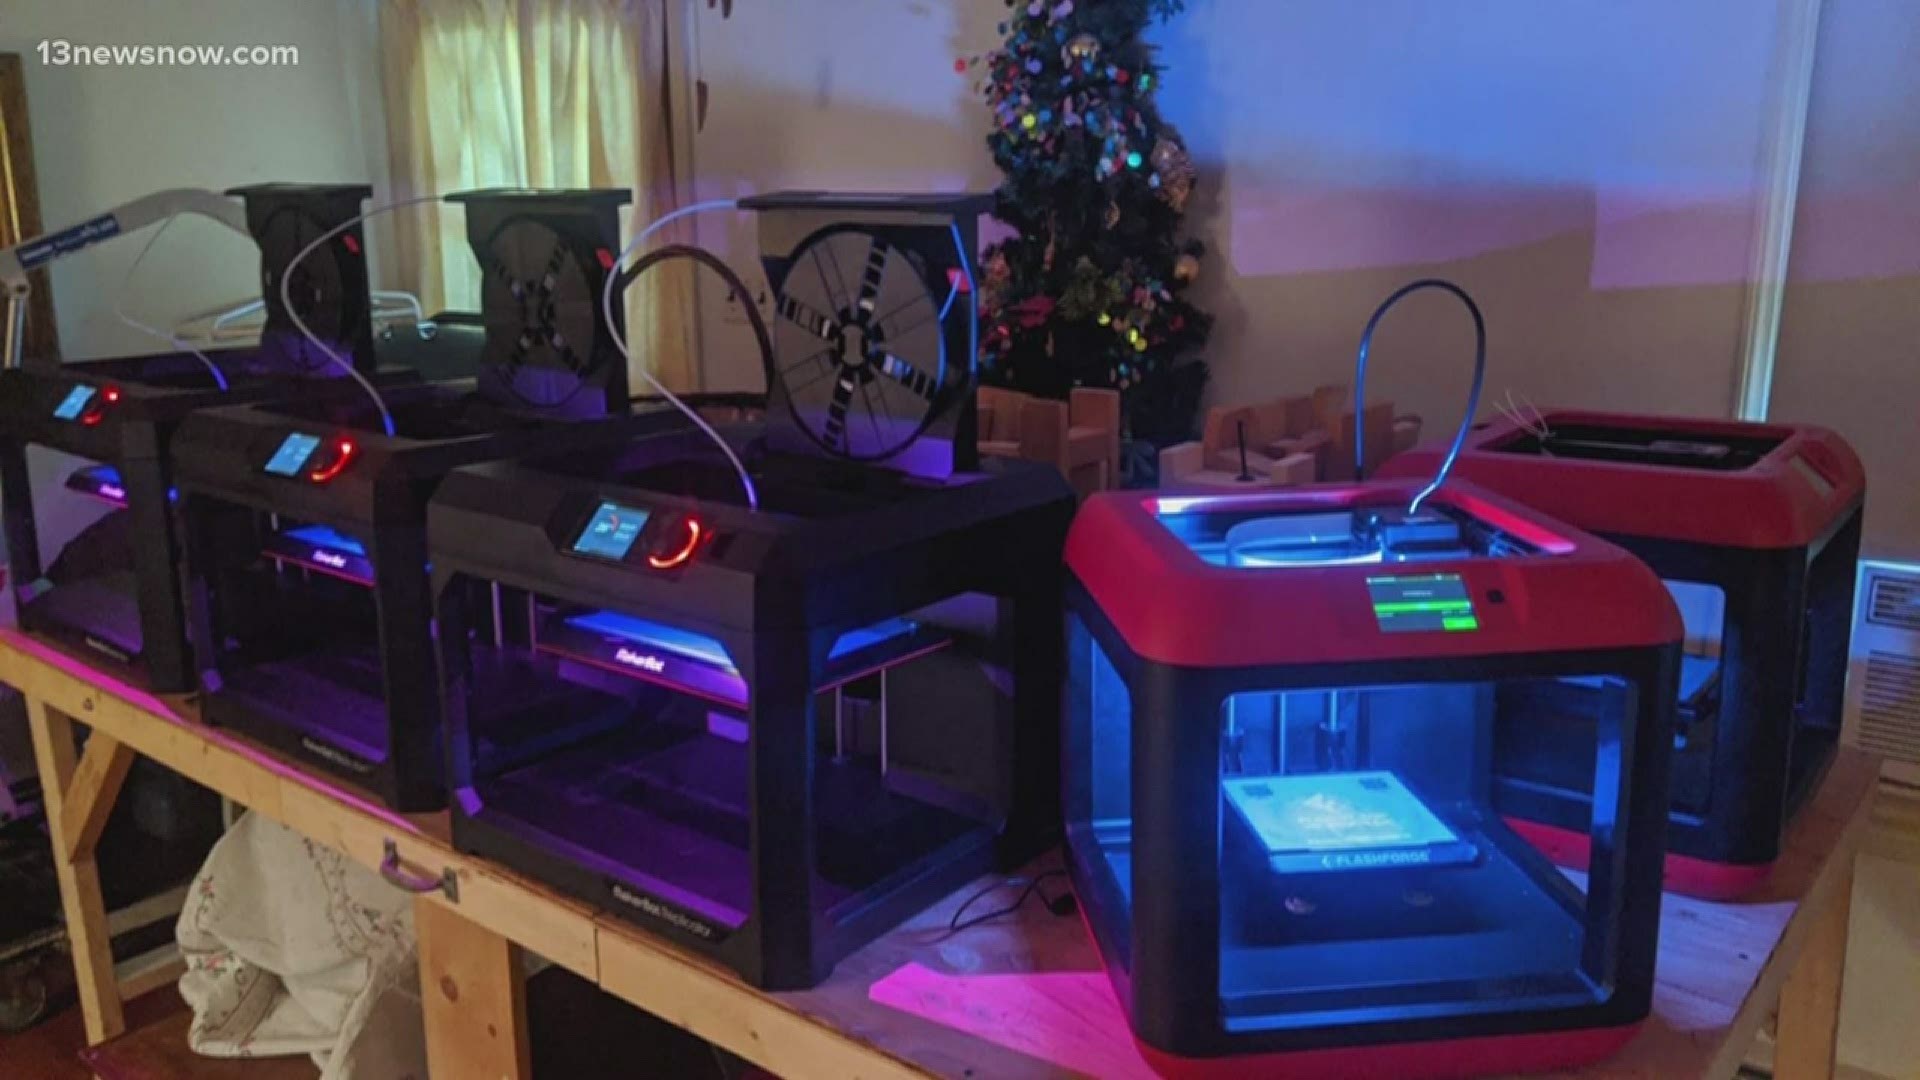 The school is putting its 3D printers to work, making masks for janitorial staff, the cafeteria workers getting food to students in need, and a local hospital.